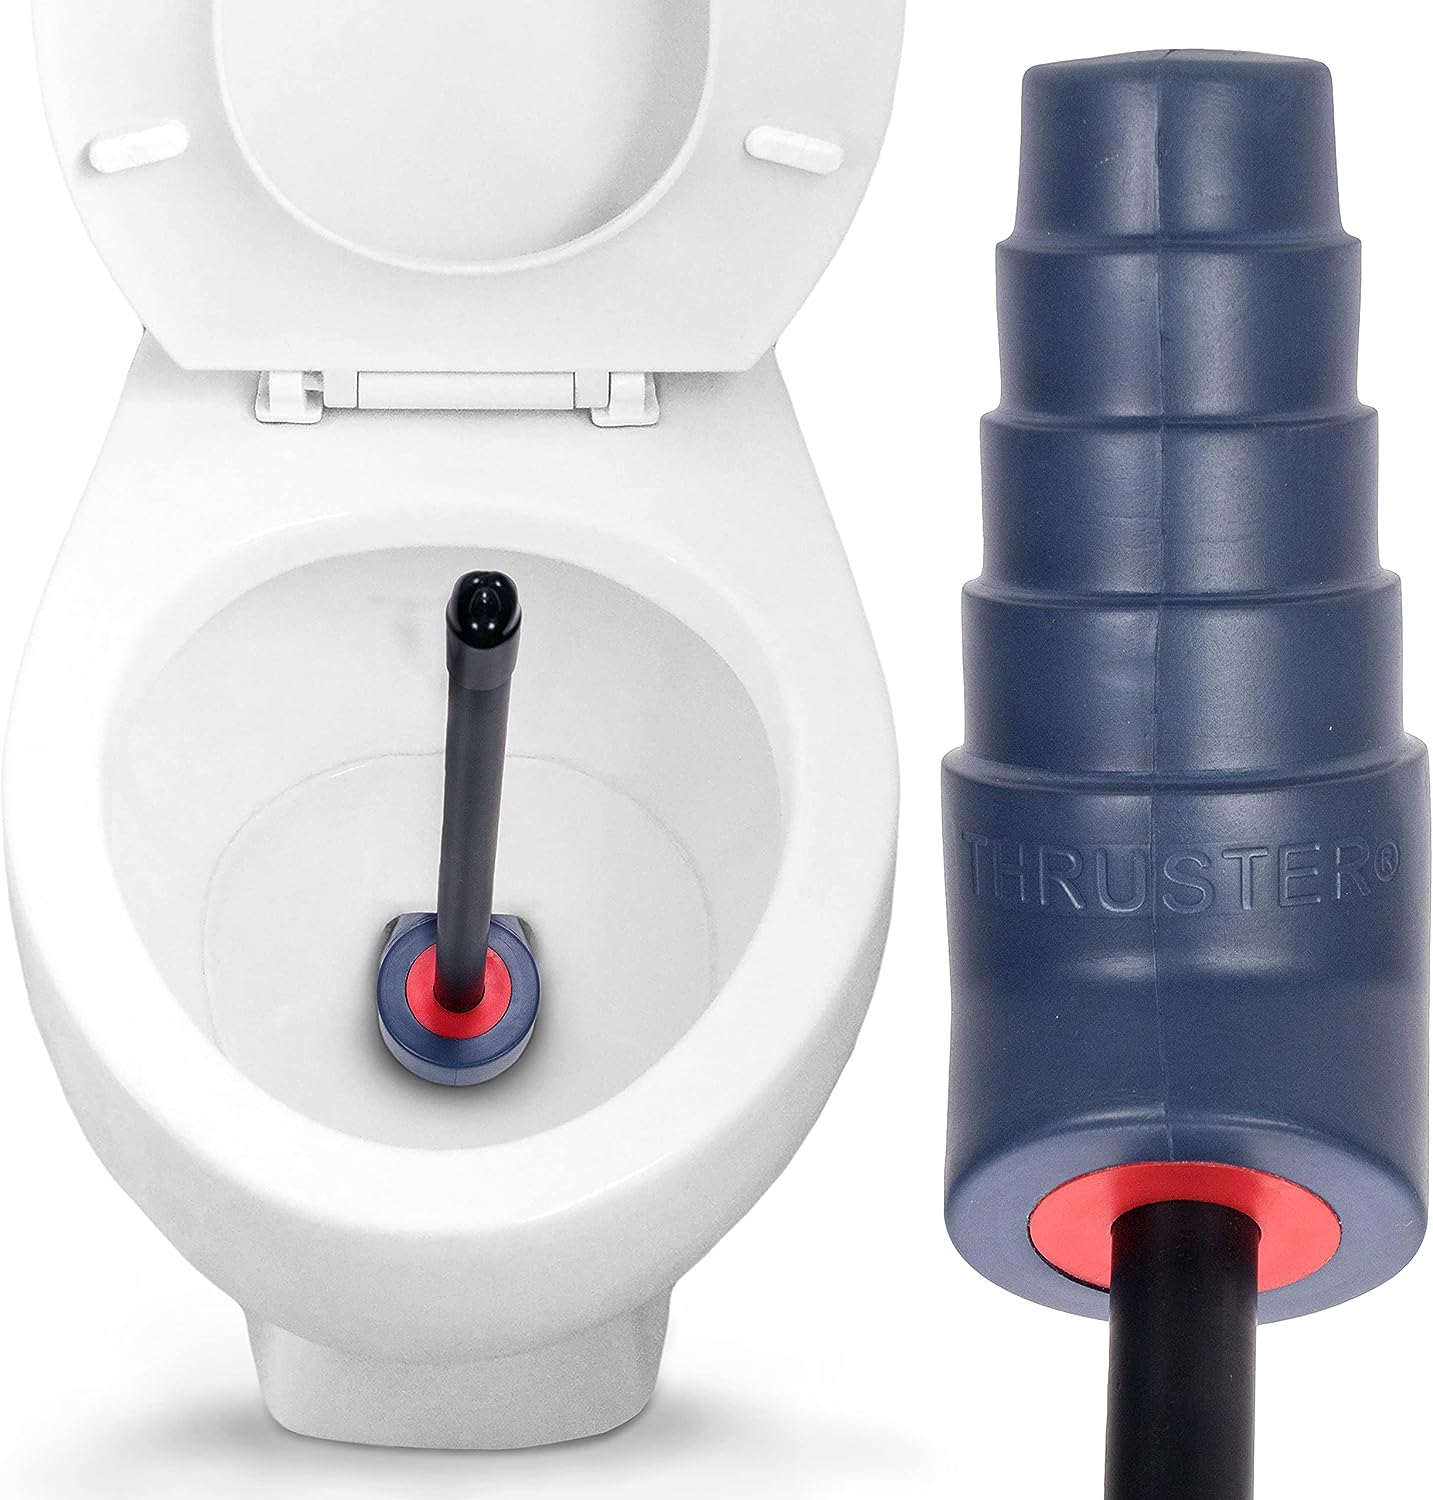 THRUSTER Toilet Plunger for US Siphonic Toilets | [...]